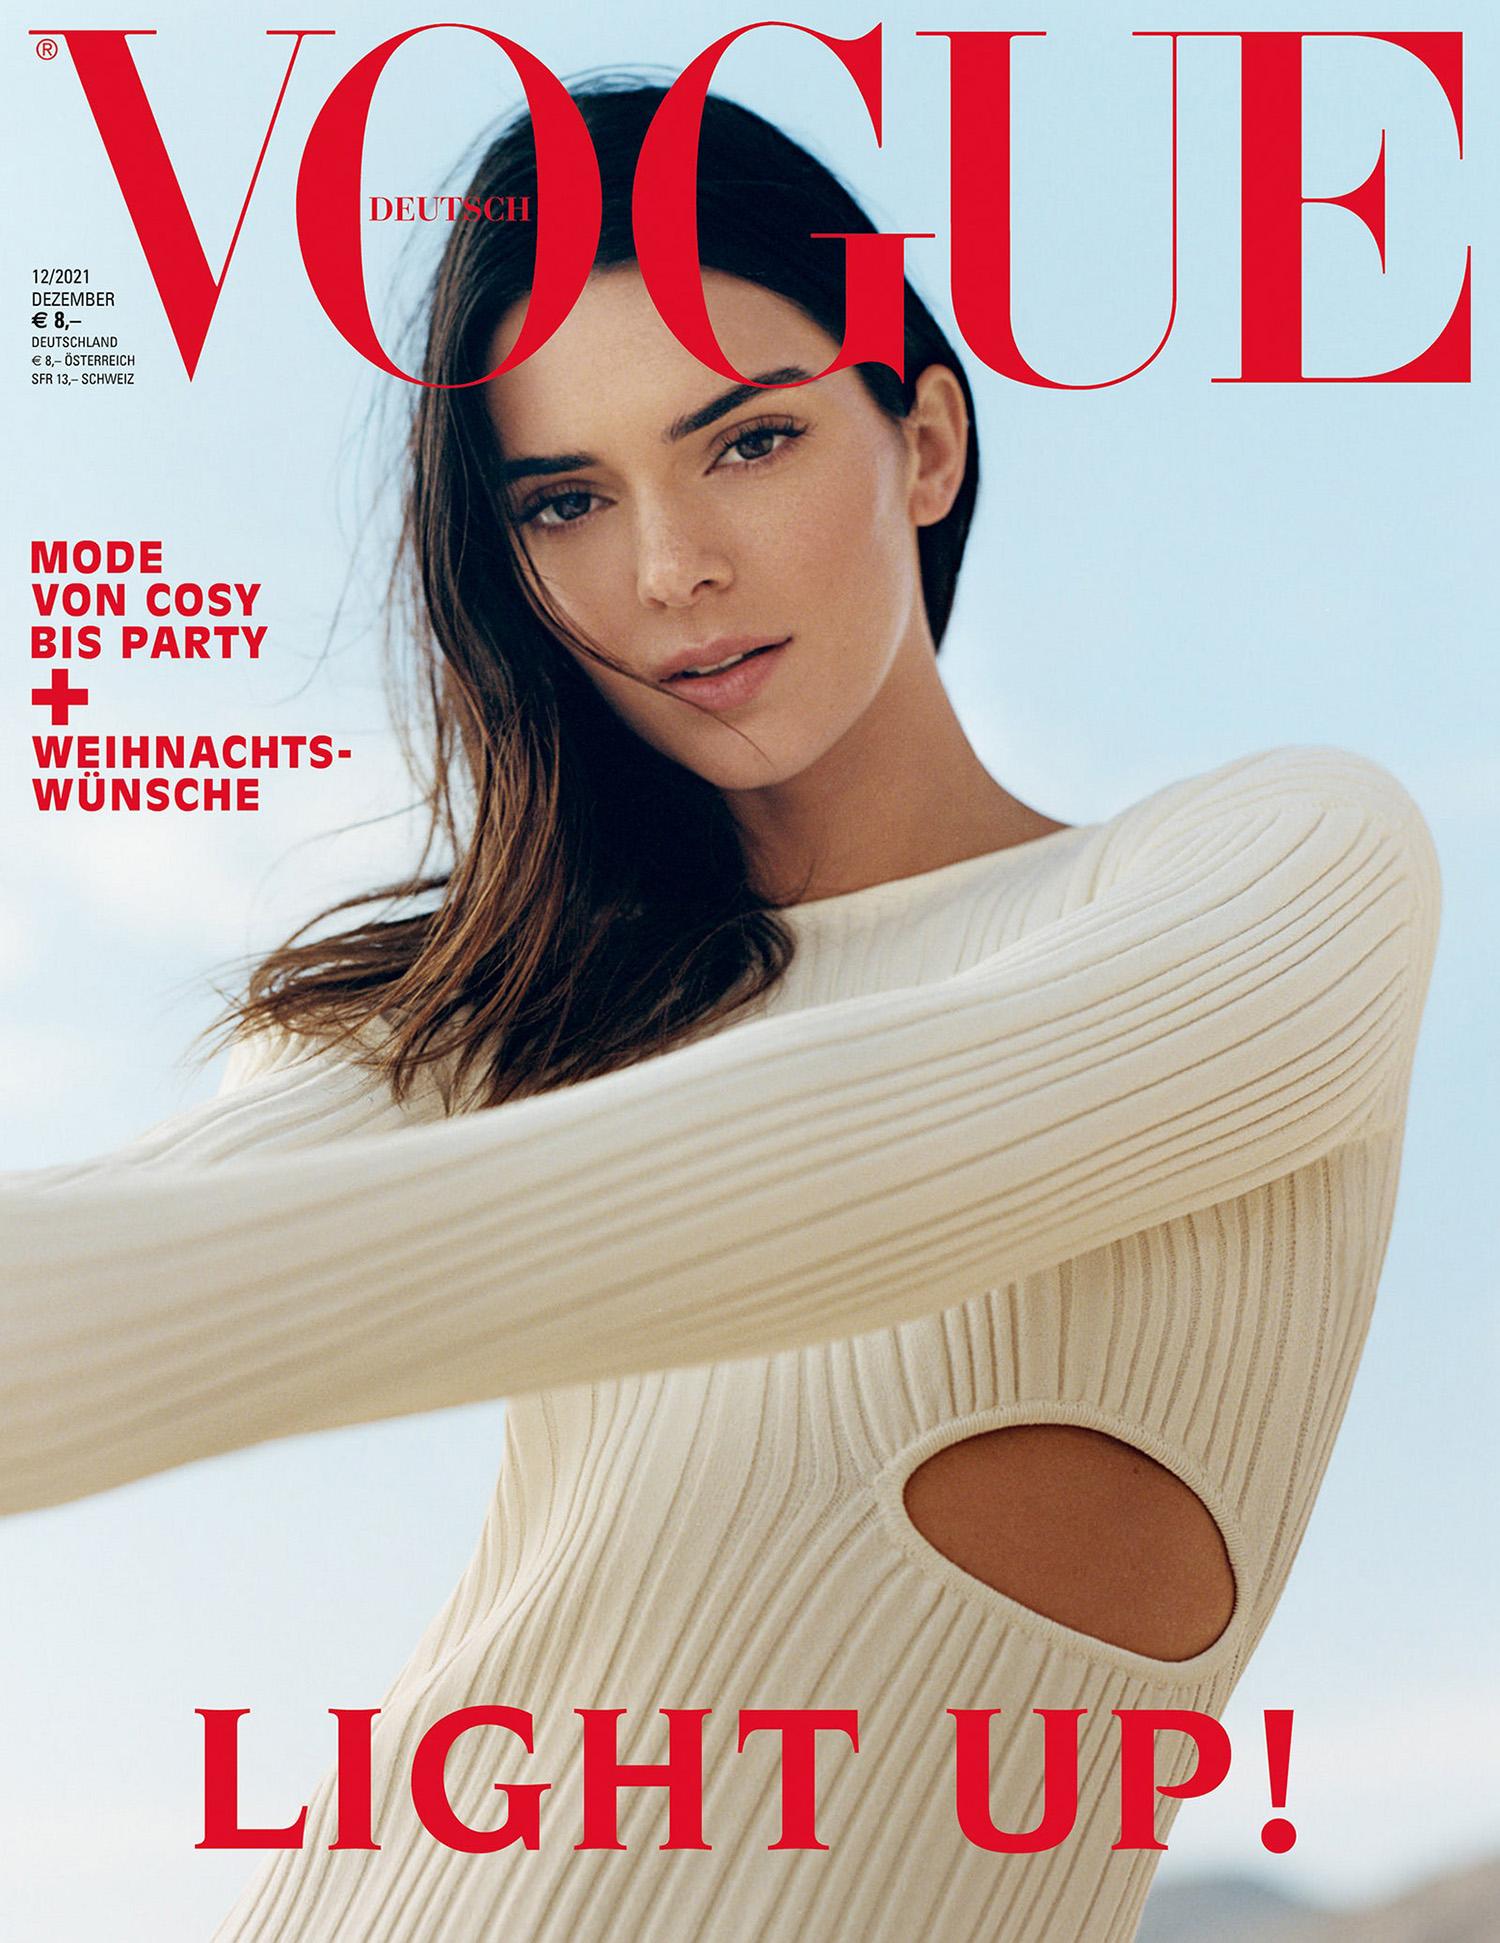 Kendall Jenner Covers Vogue Germany December 2021